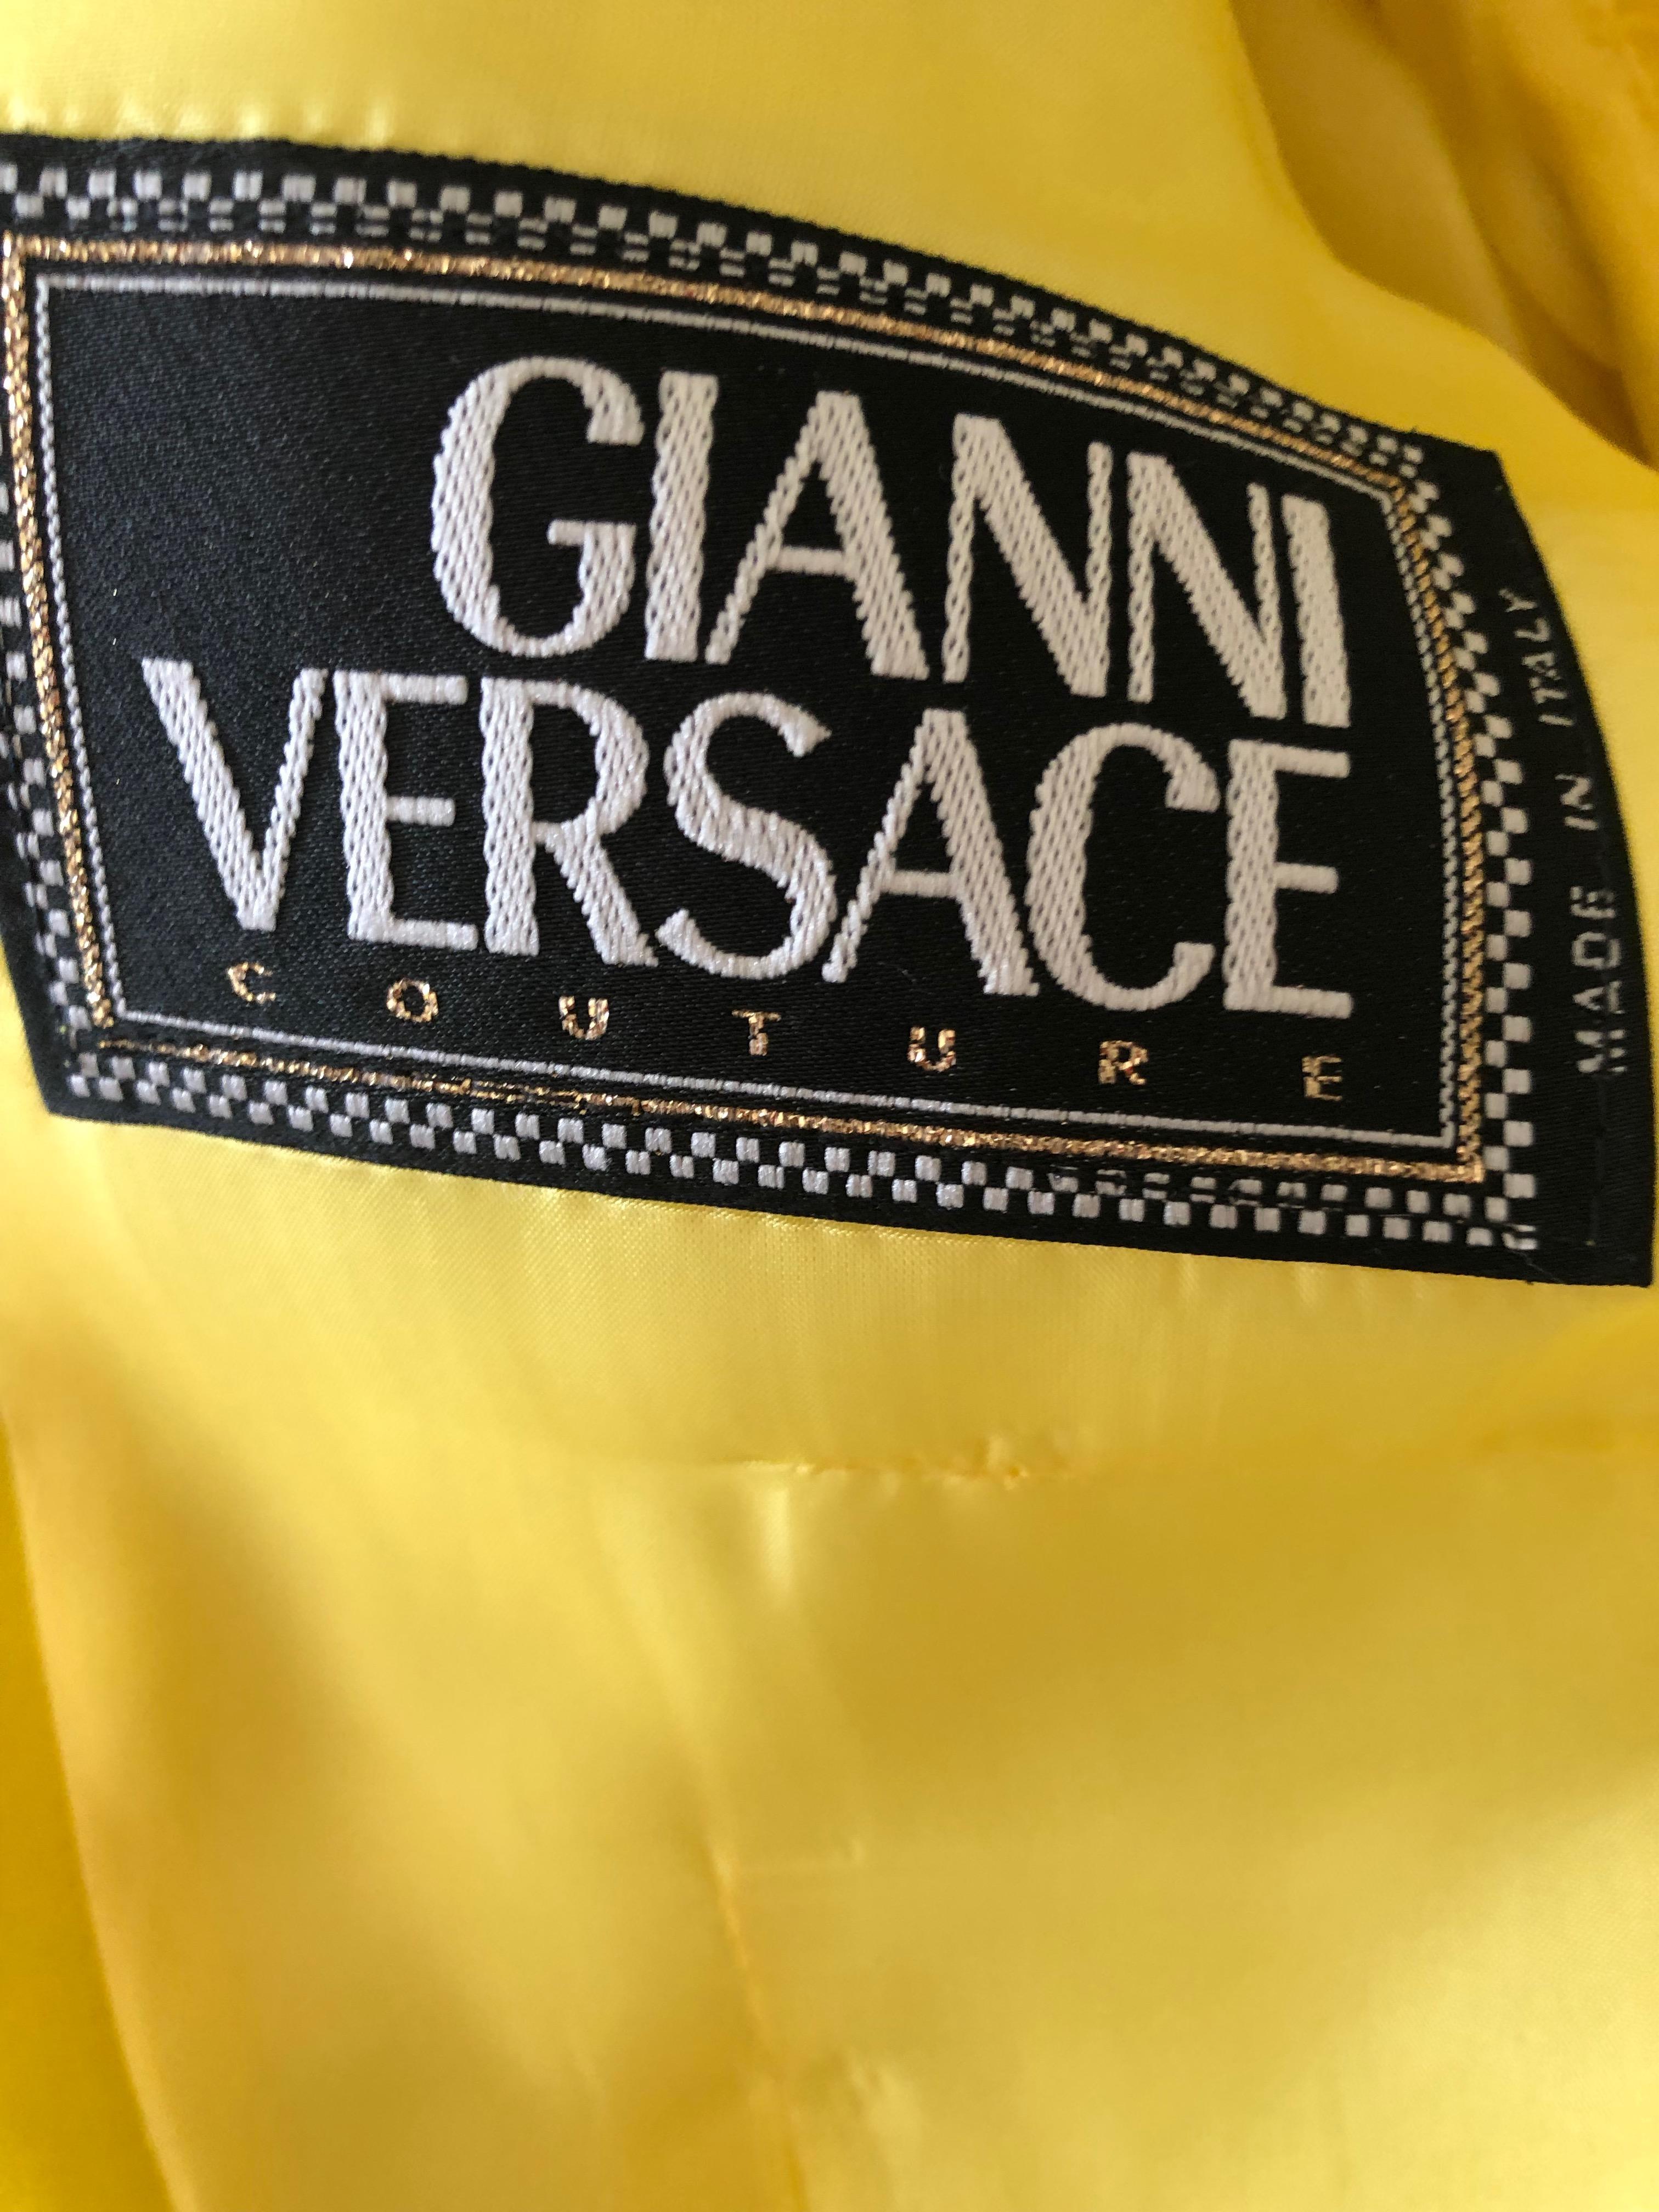 Gianni Versace Iconic Fall 1992 Screaming Yellow Jacket with Leather Details.
Shawl collar with Medusa embellished tooled leather pocket flaps.
Size 40
Bust 38